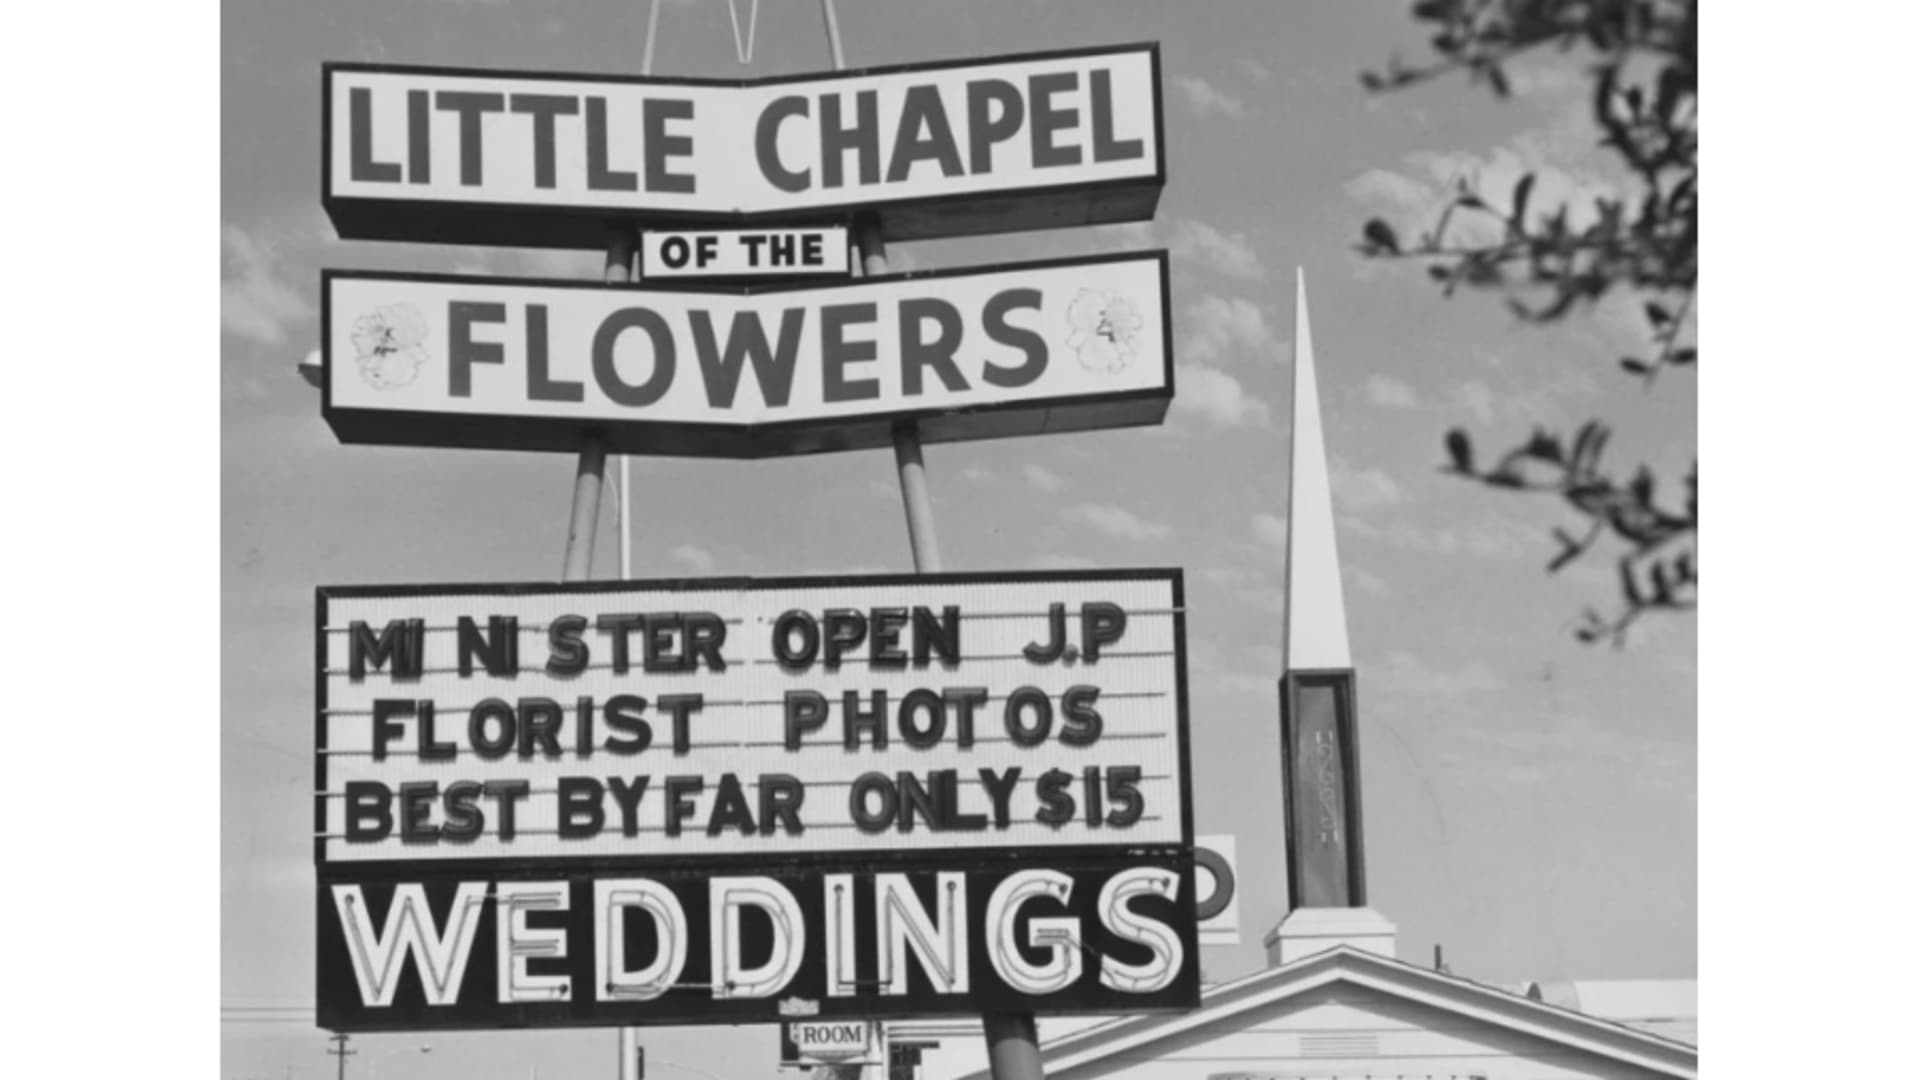 A picture taken in 1953 of a sign outside the Chapel of the Flowers promoting its $15 wedding packages.